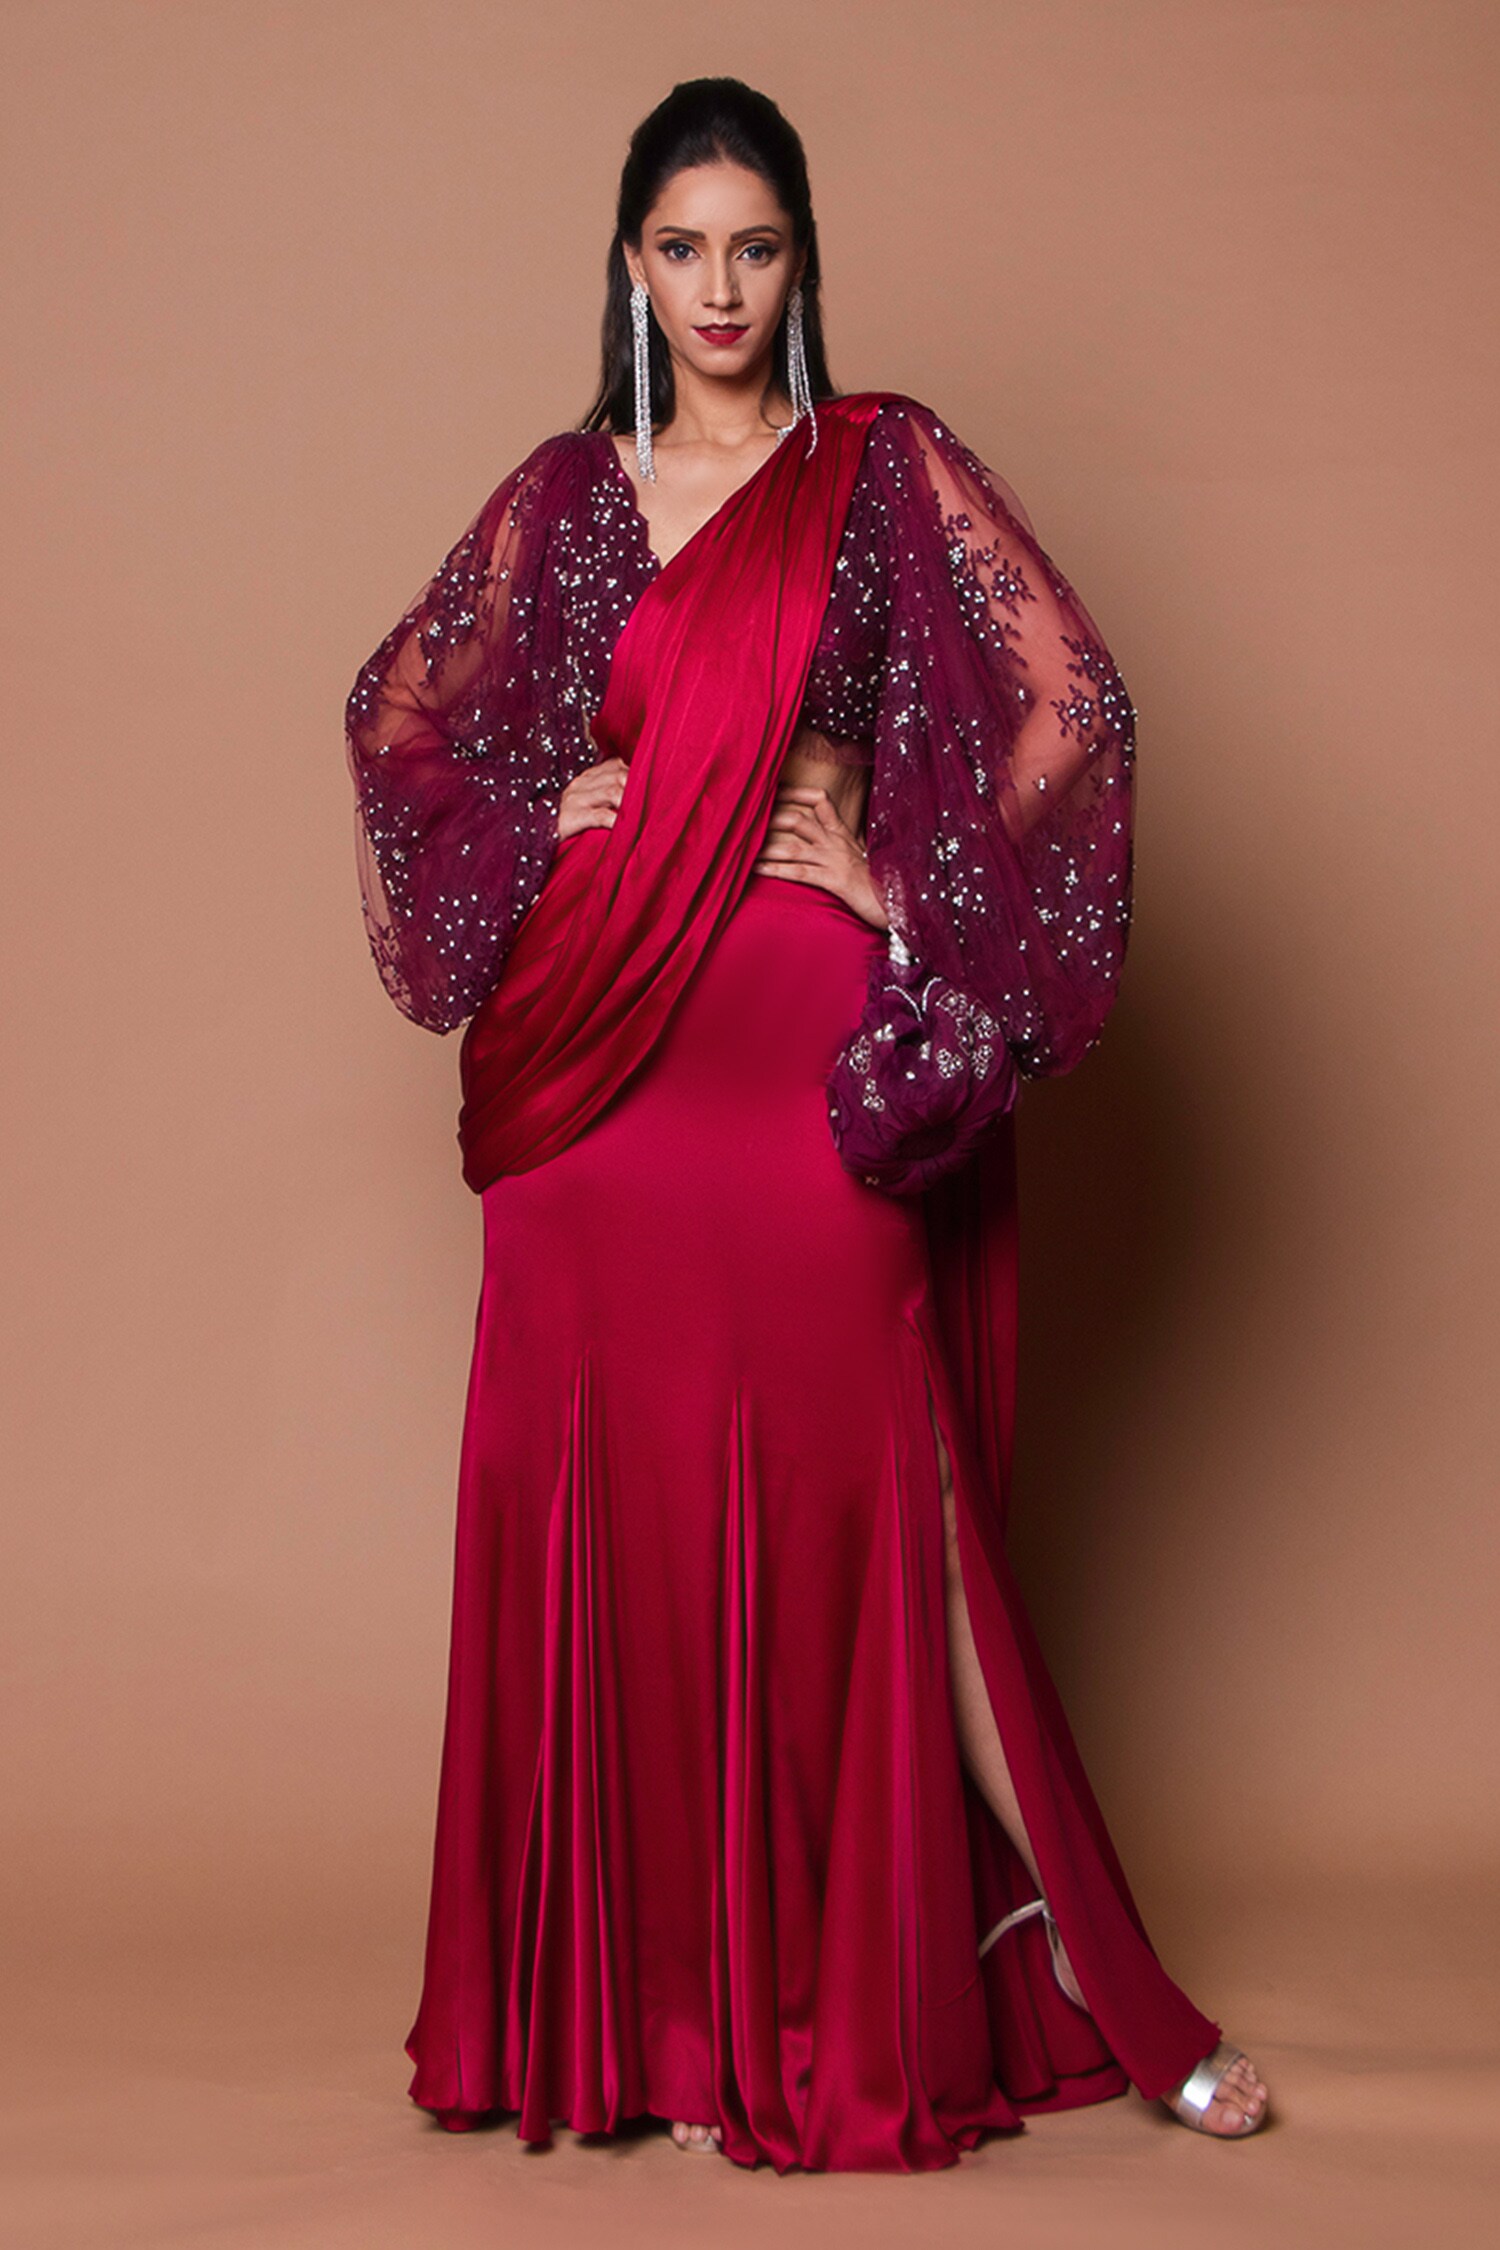 Shehlaa Khan Red Satin Draped Saree With Blouse